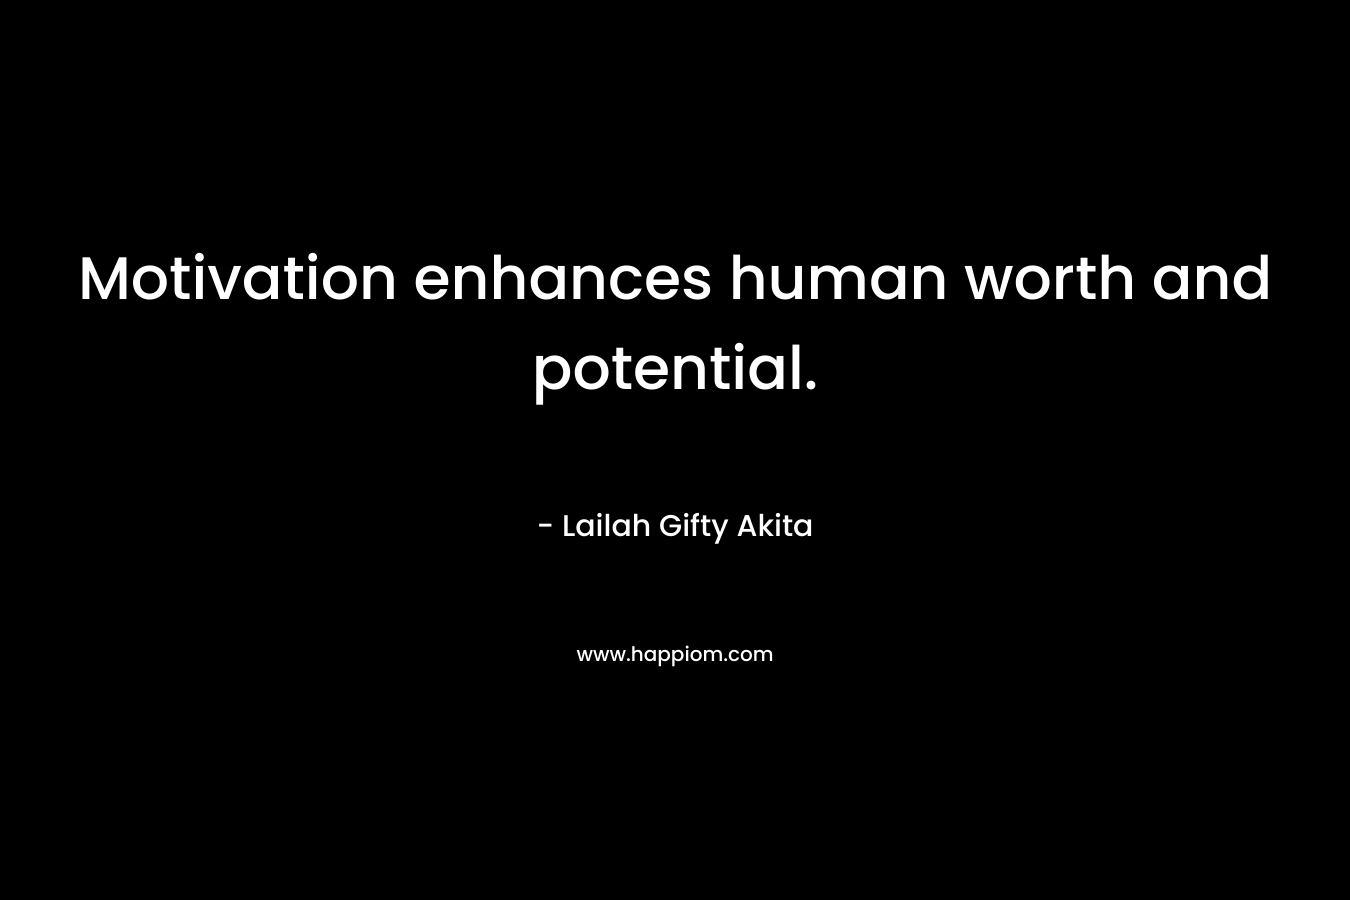 Motivation enhances human worth and potential.